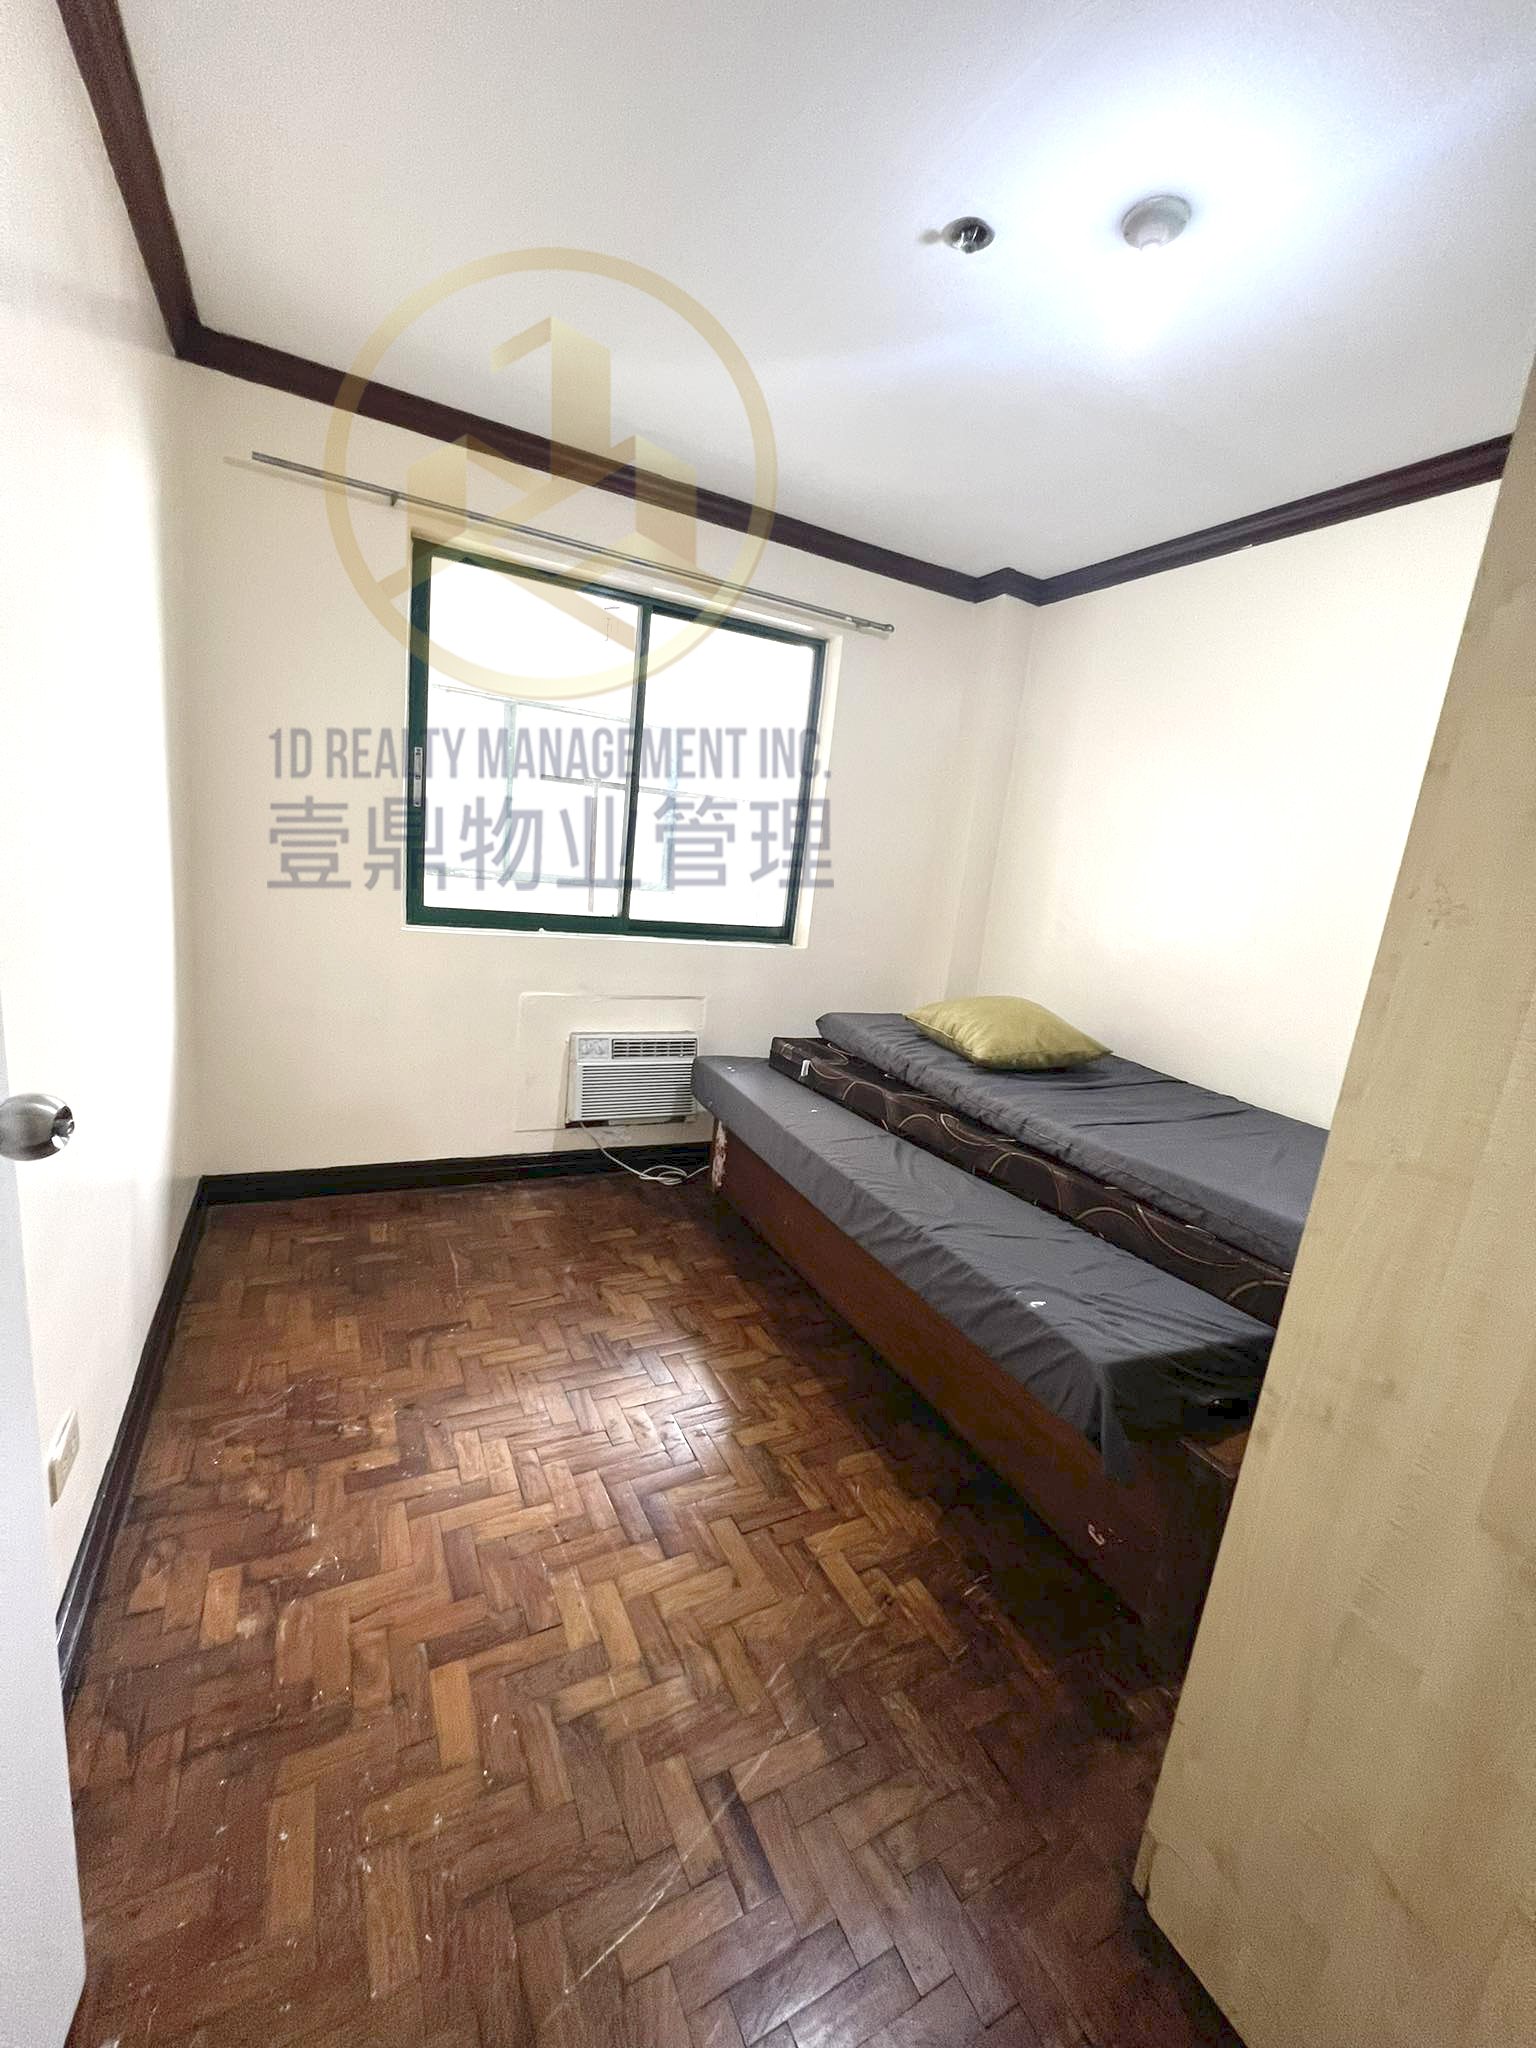 Palm Towers - San Antonio Village Makati City - FOR LEASE 1BR